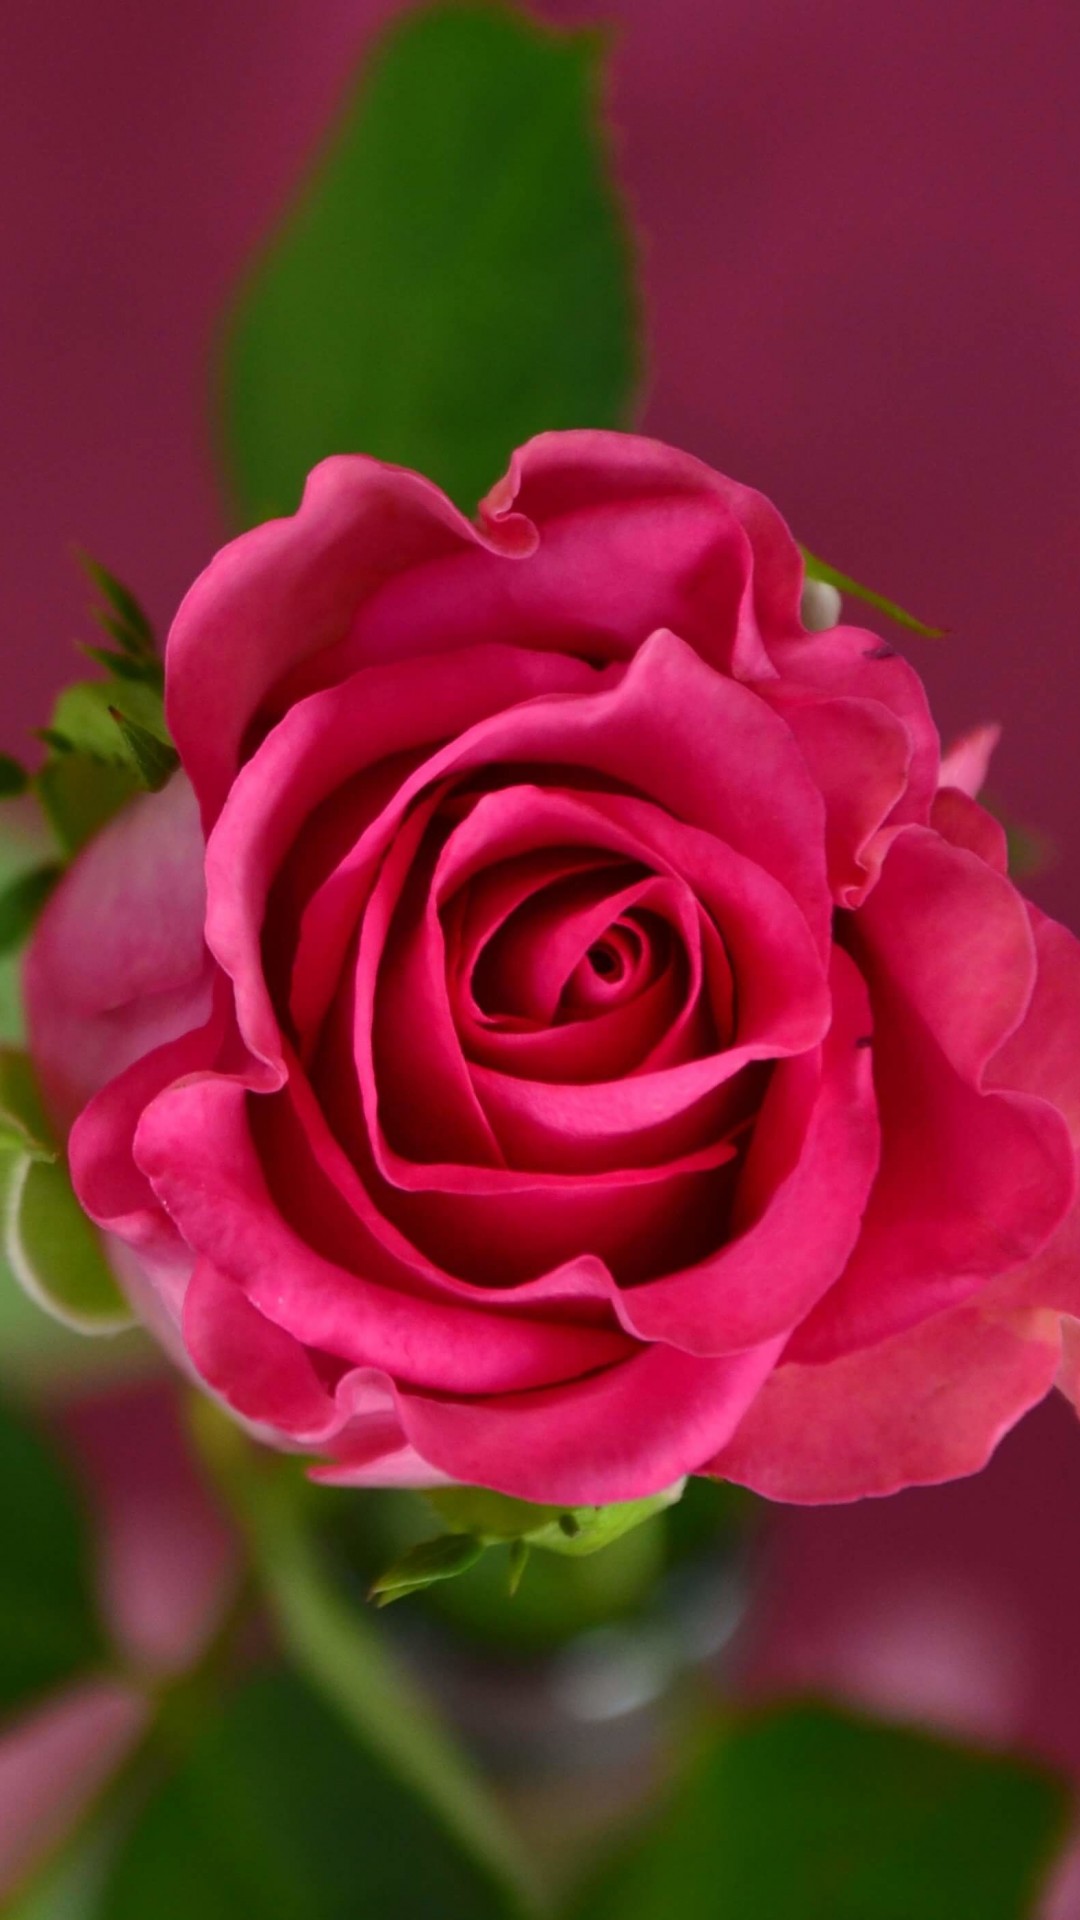 Single Pink Rose Wallpaper for SAMSUNG Galaxy S4